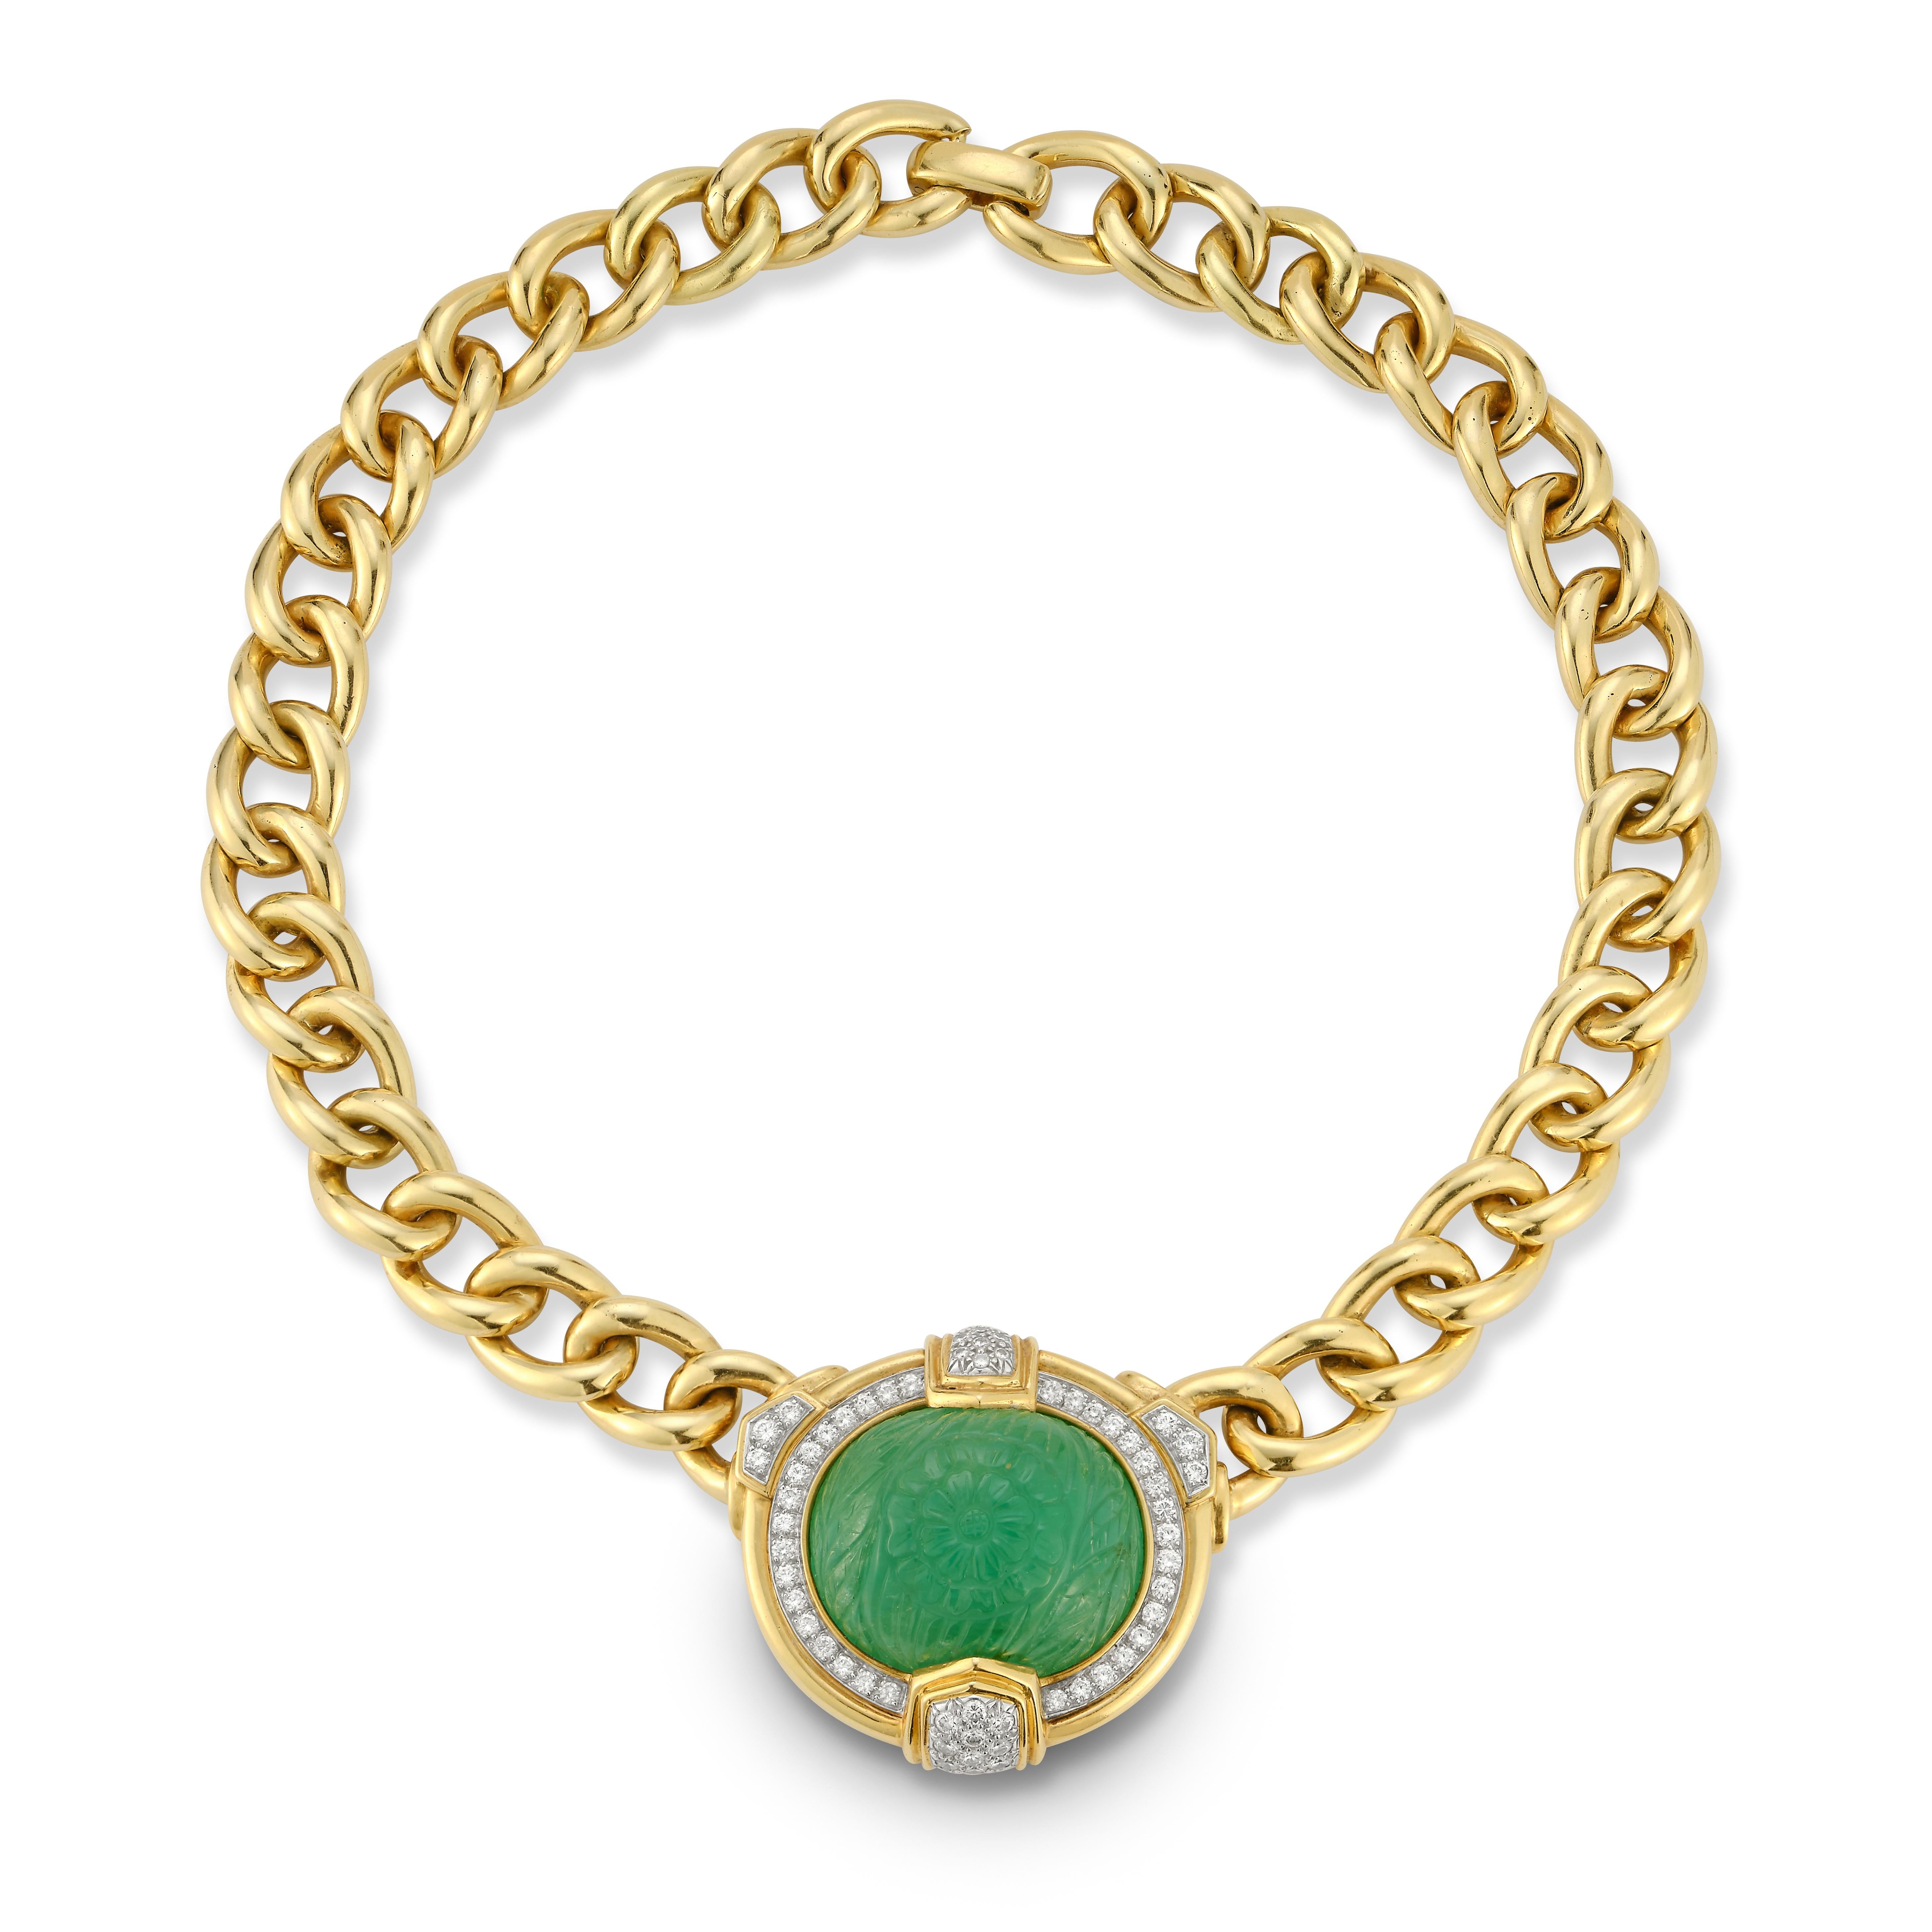 David Webb Carved Emerald Gold Link Necklace

A carved emerald set with round diamonds in a gold link chain.

Emerald measuring approximately 31.8 x 25.9 x 16.1mm

Diamonds weighing a total of approximately 2.50 carats

Length 16½ inches

Signed